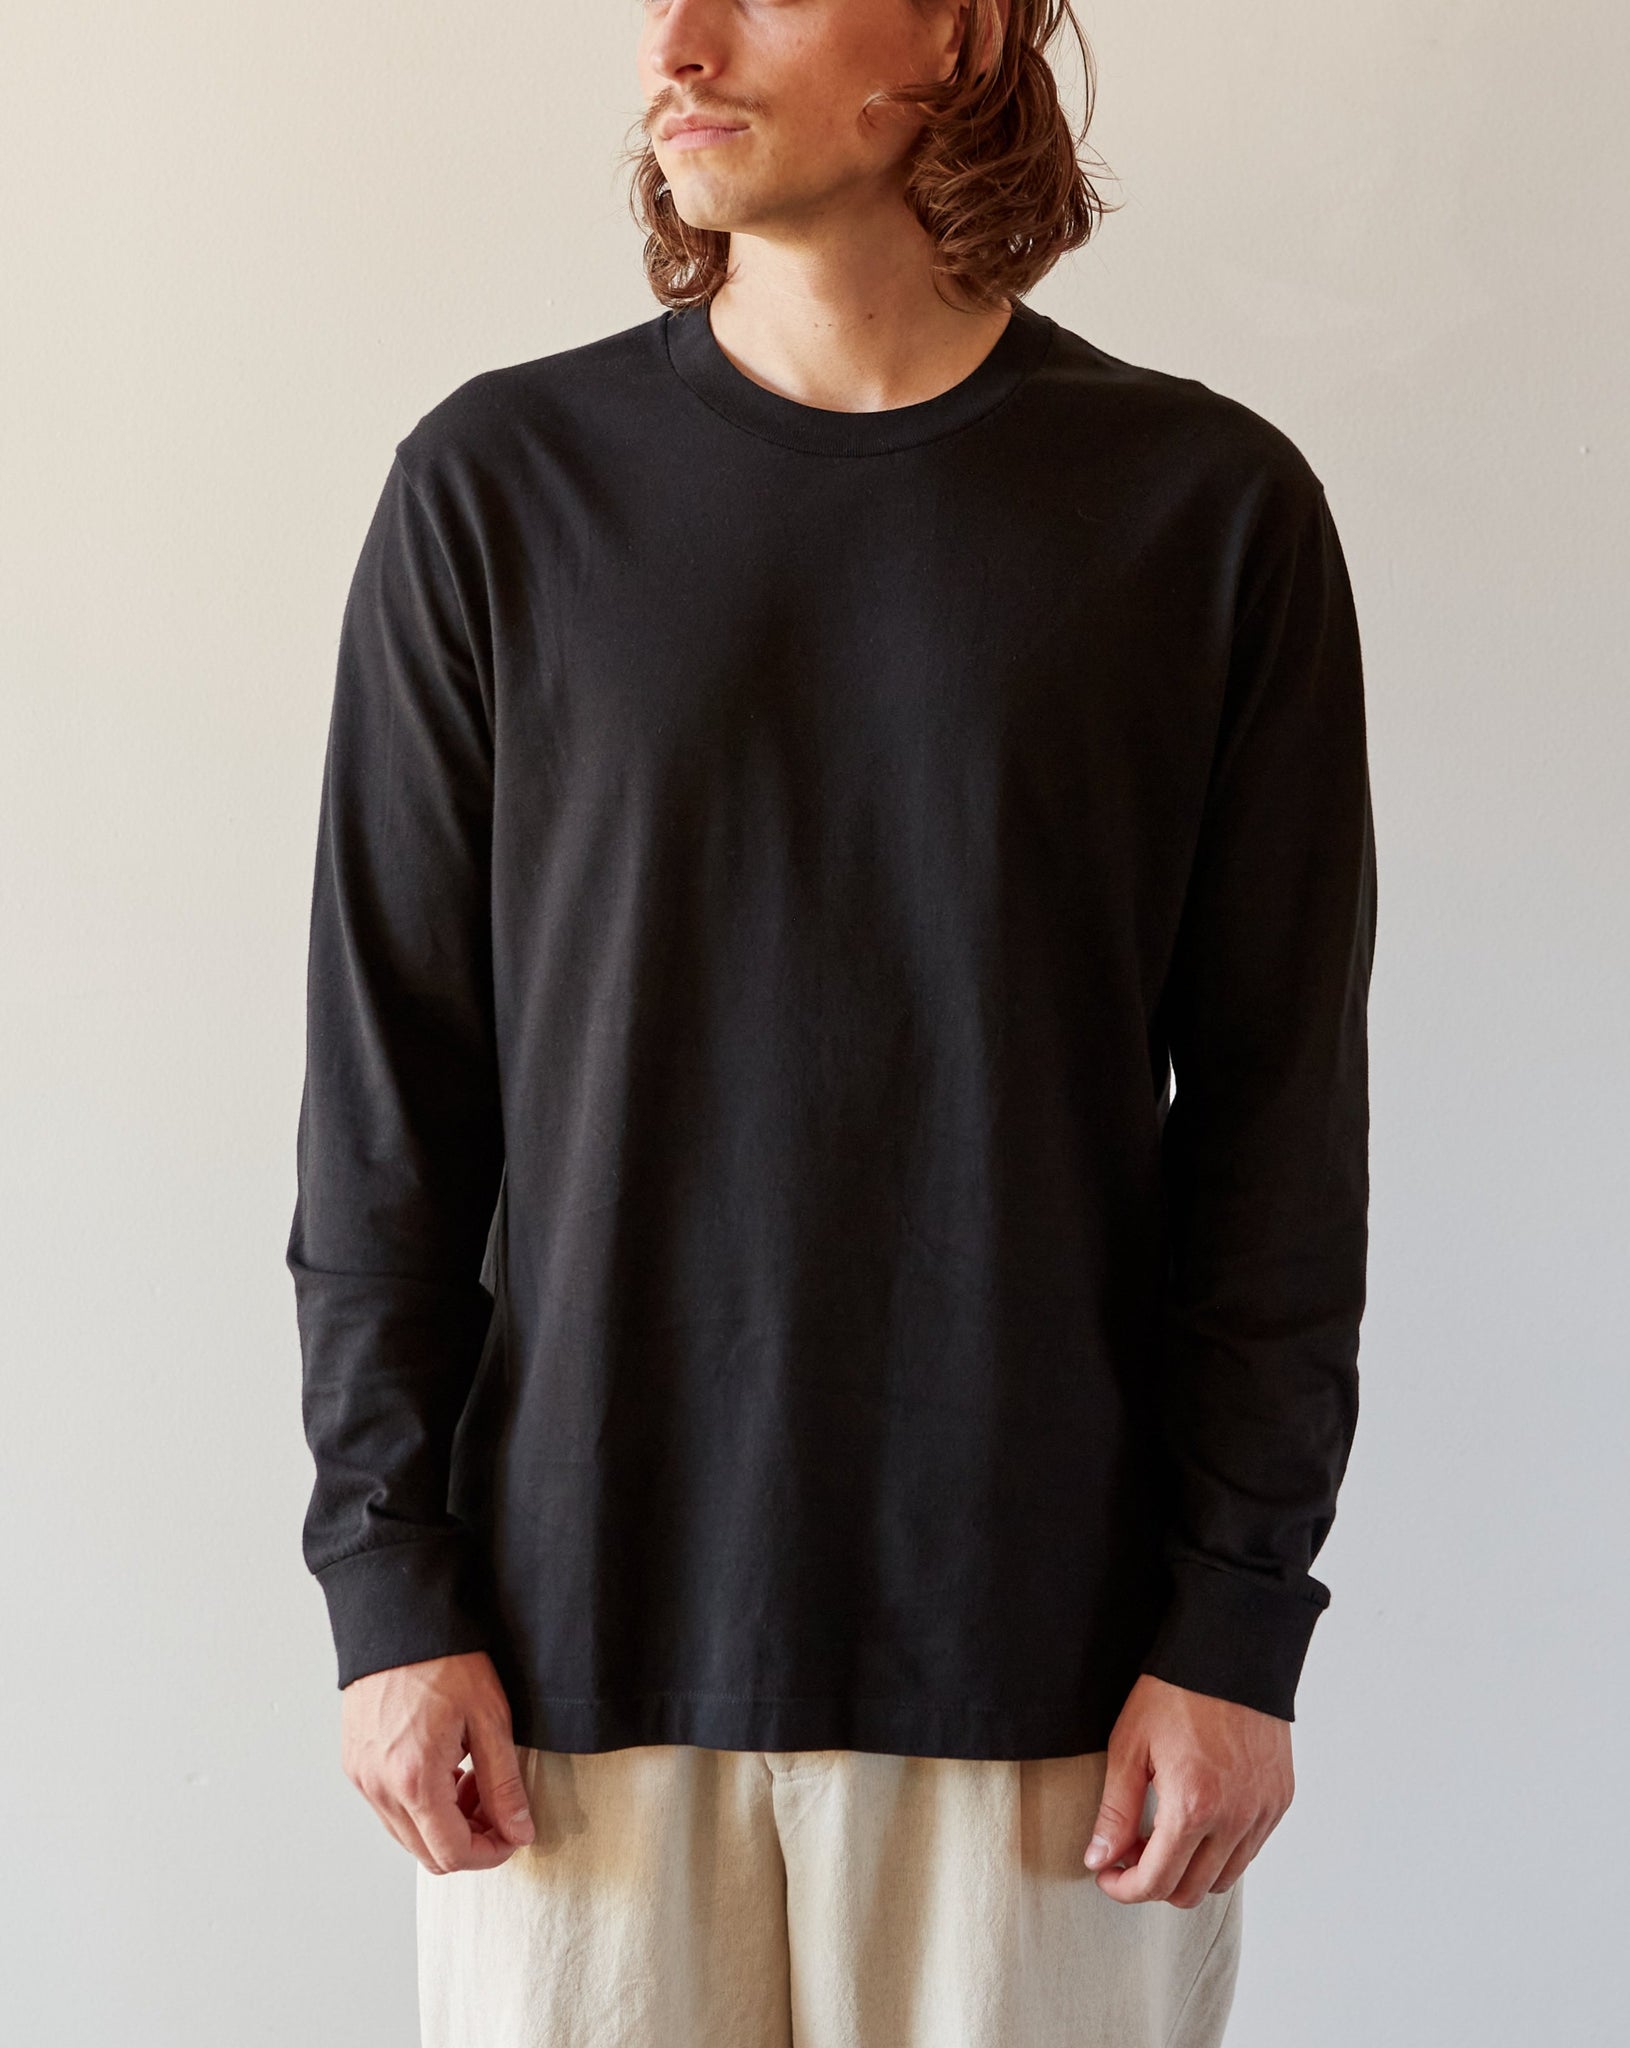 The Long Sleeve Crew Pullover